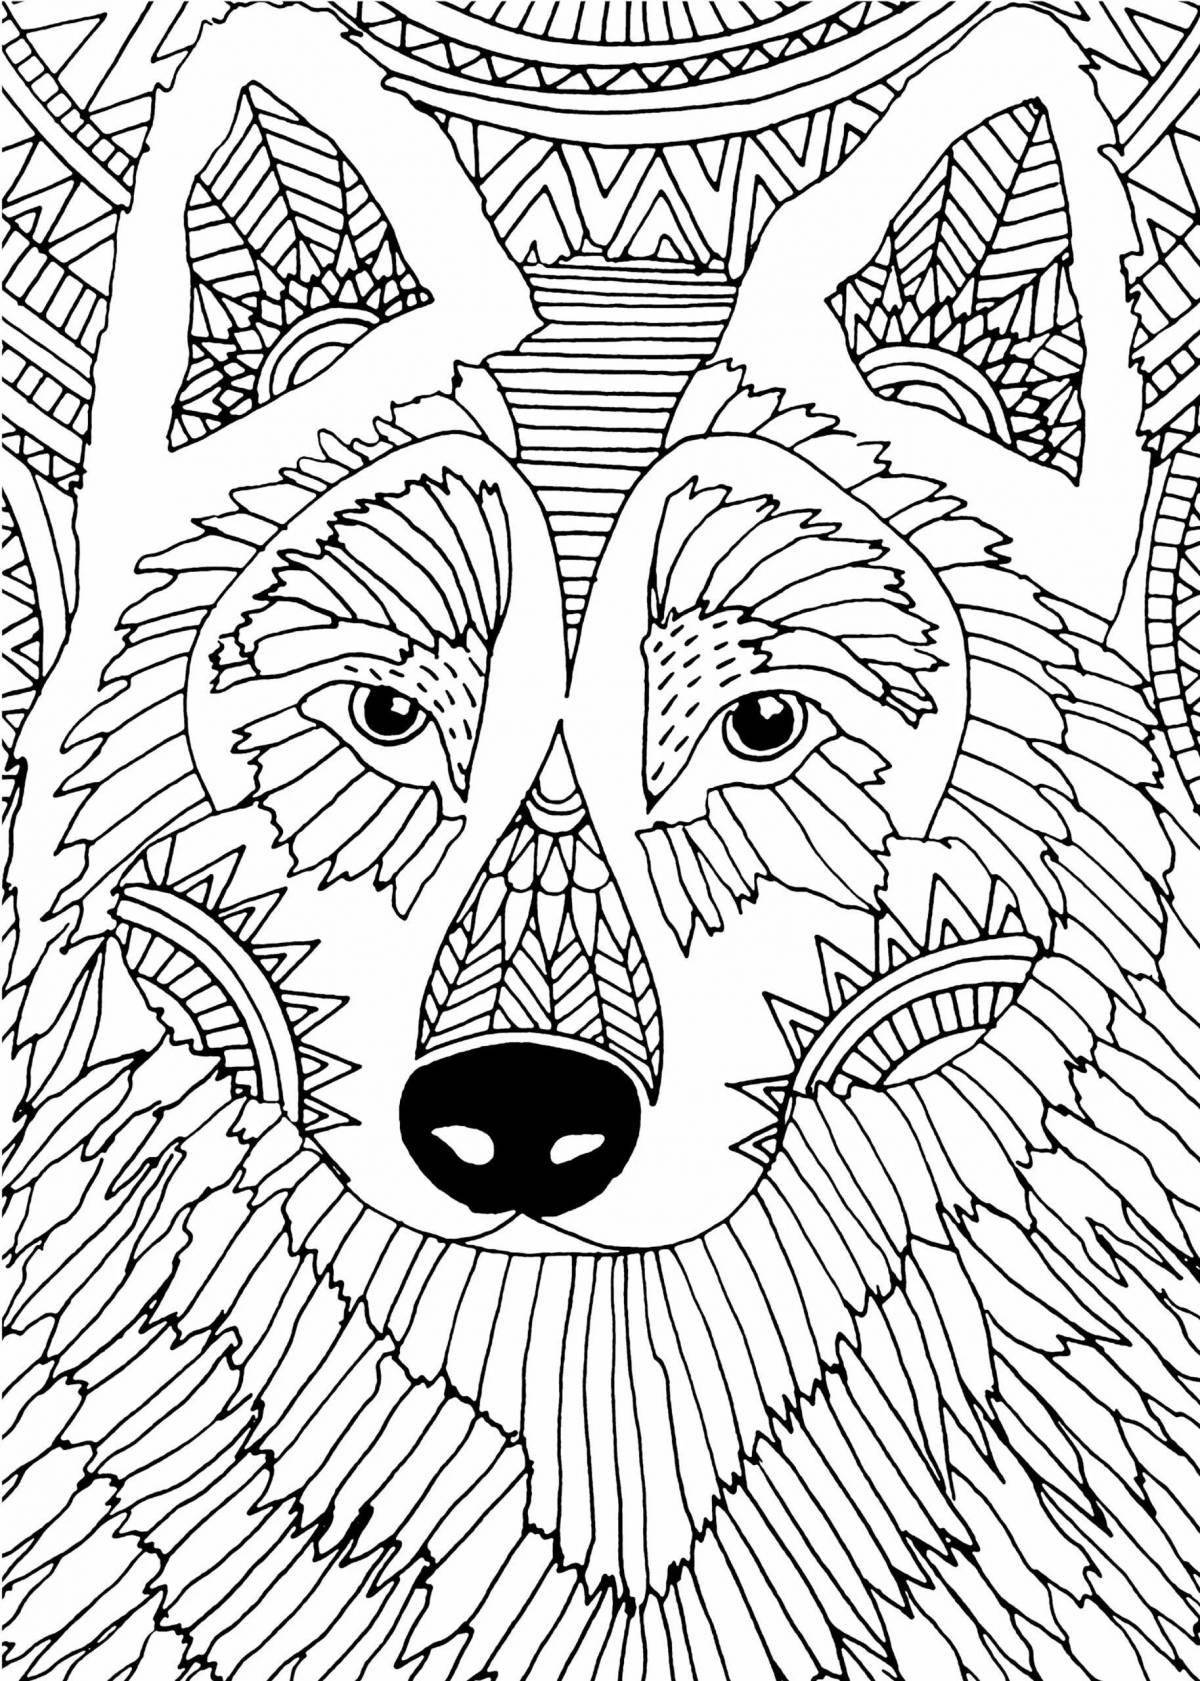 Bright soothing coloring pages